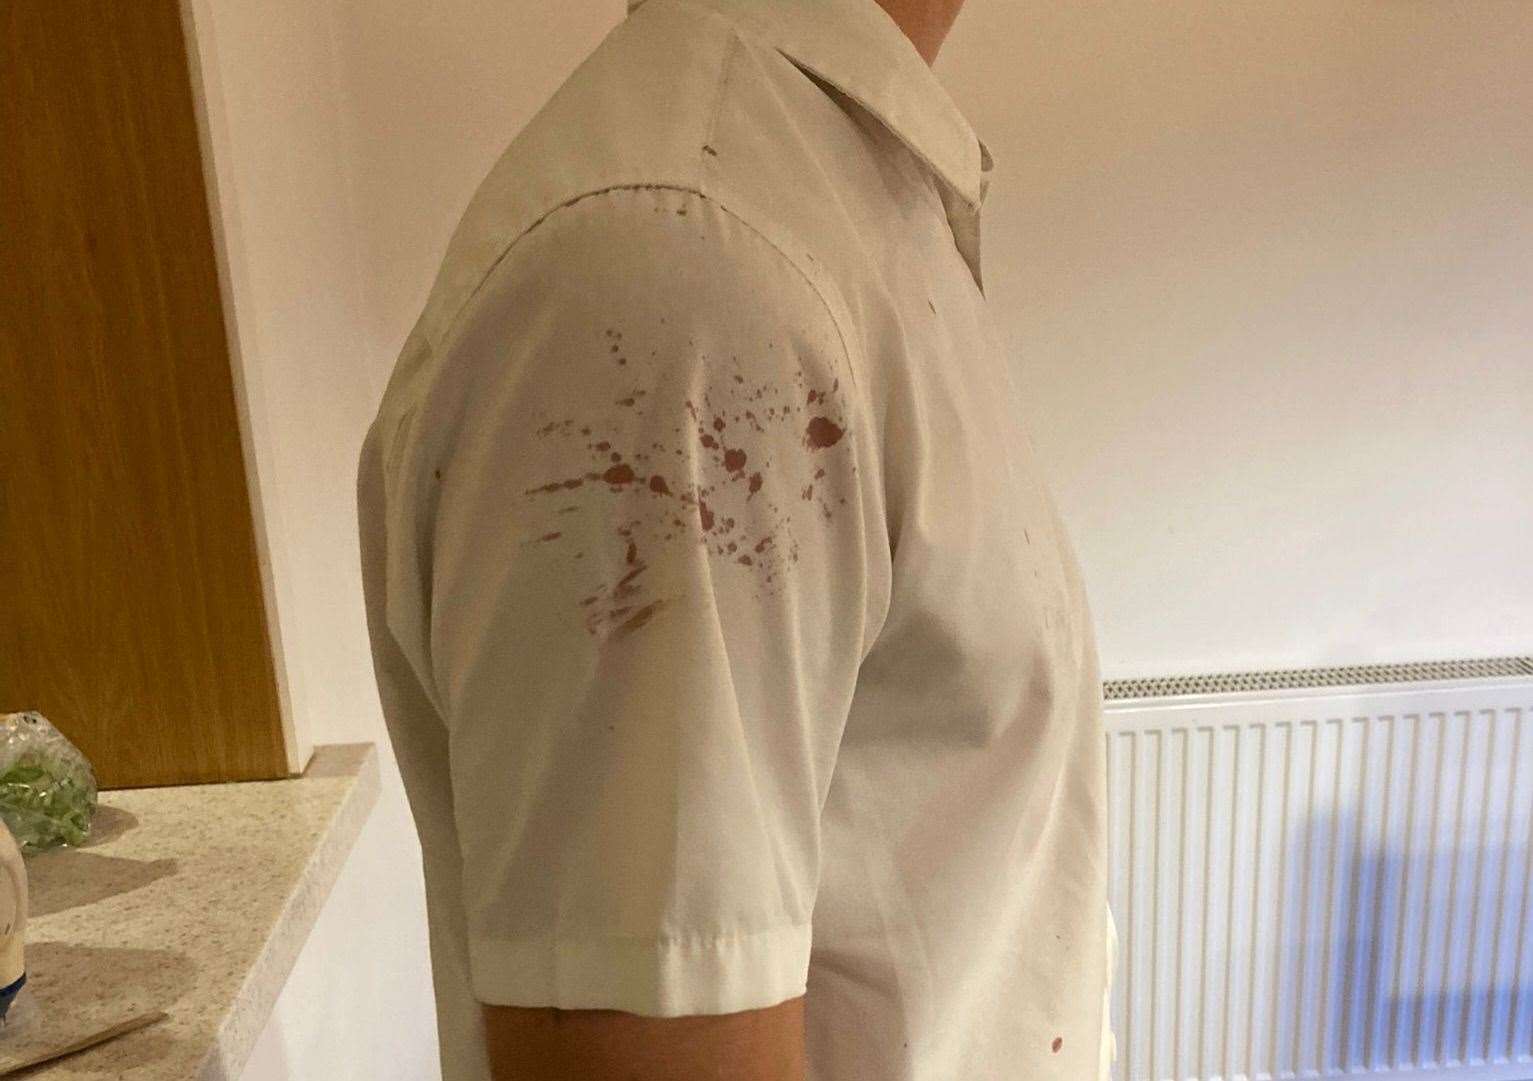 His shirt was splattered in blood following the assault outside the George Inn in Meopham